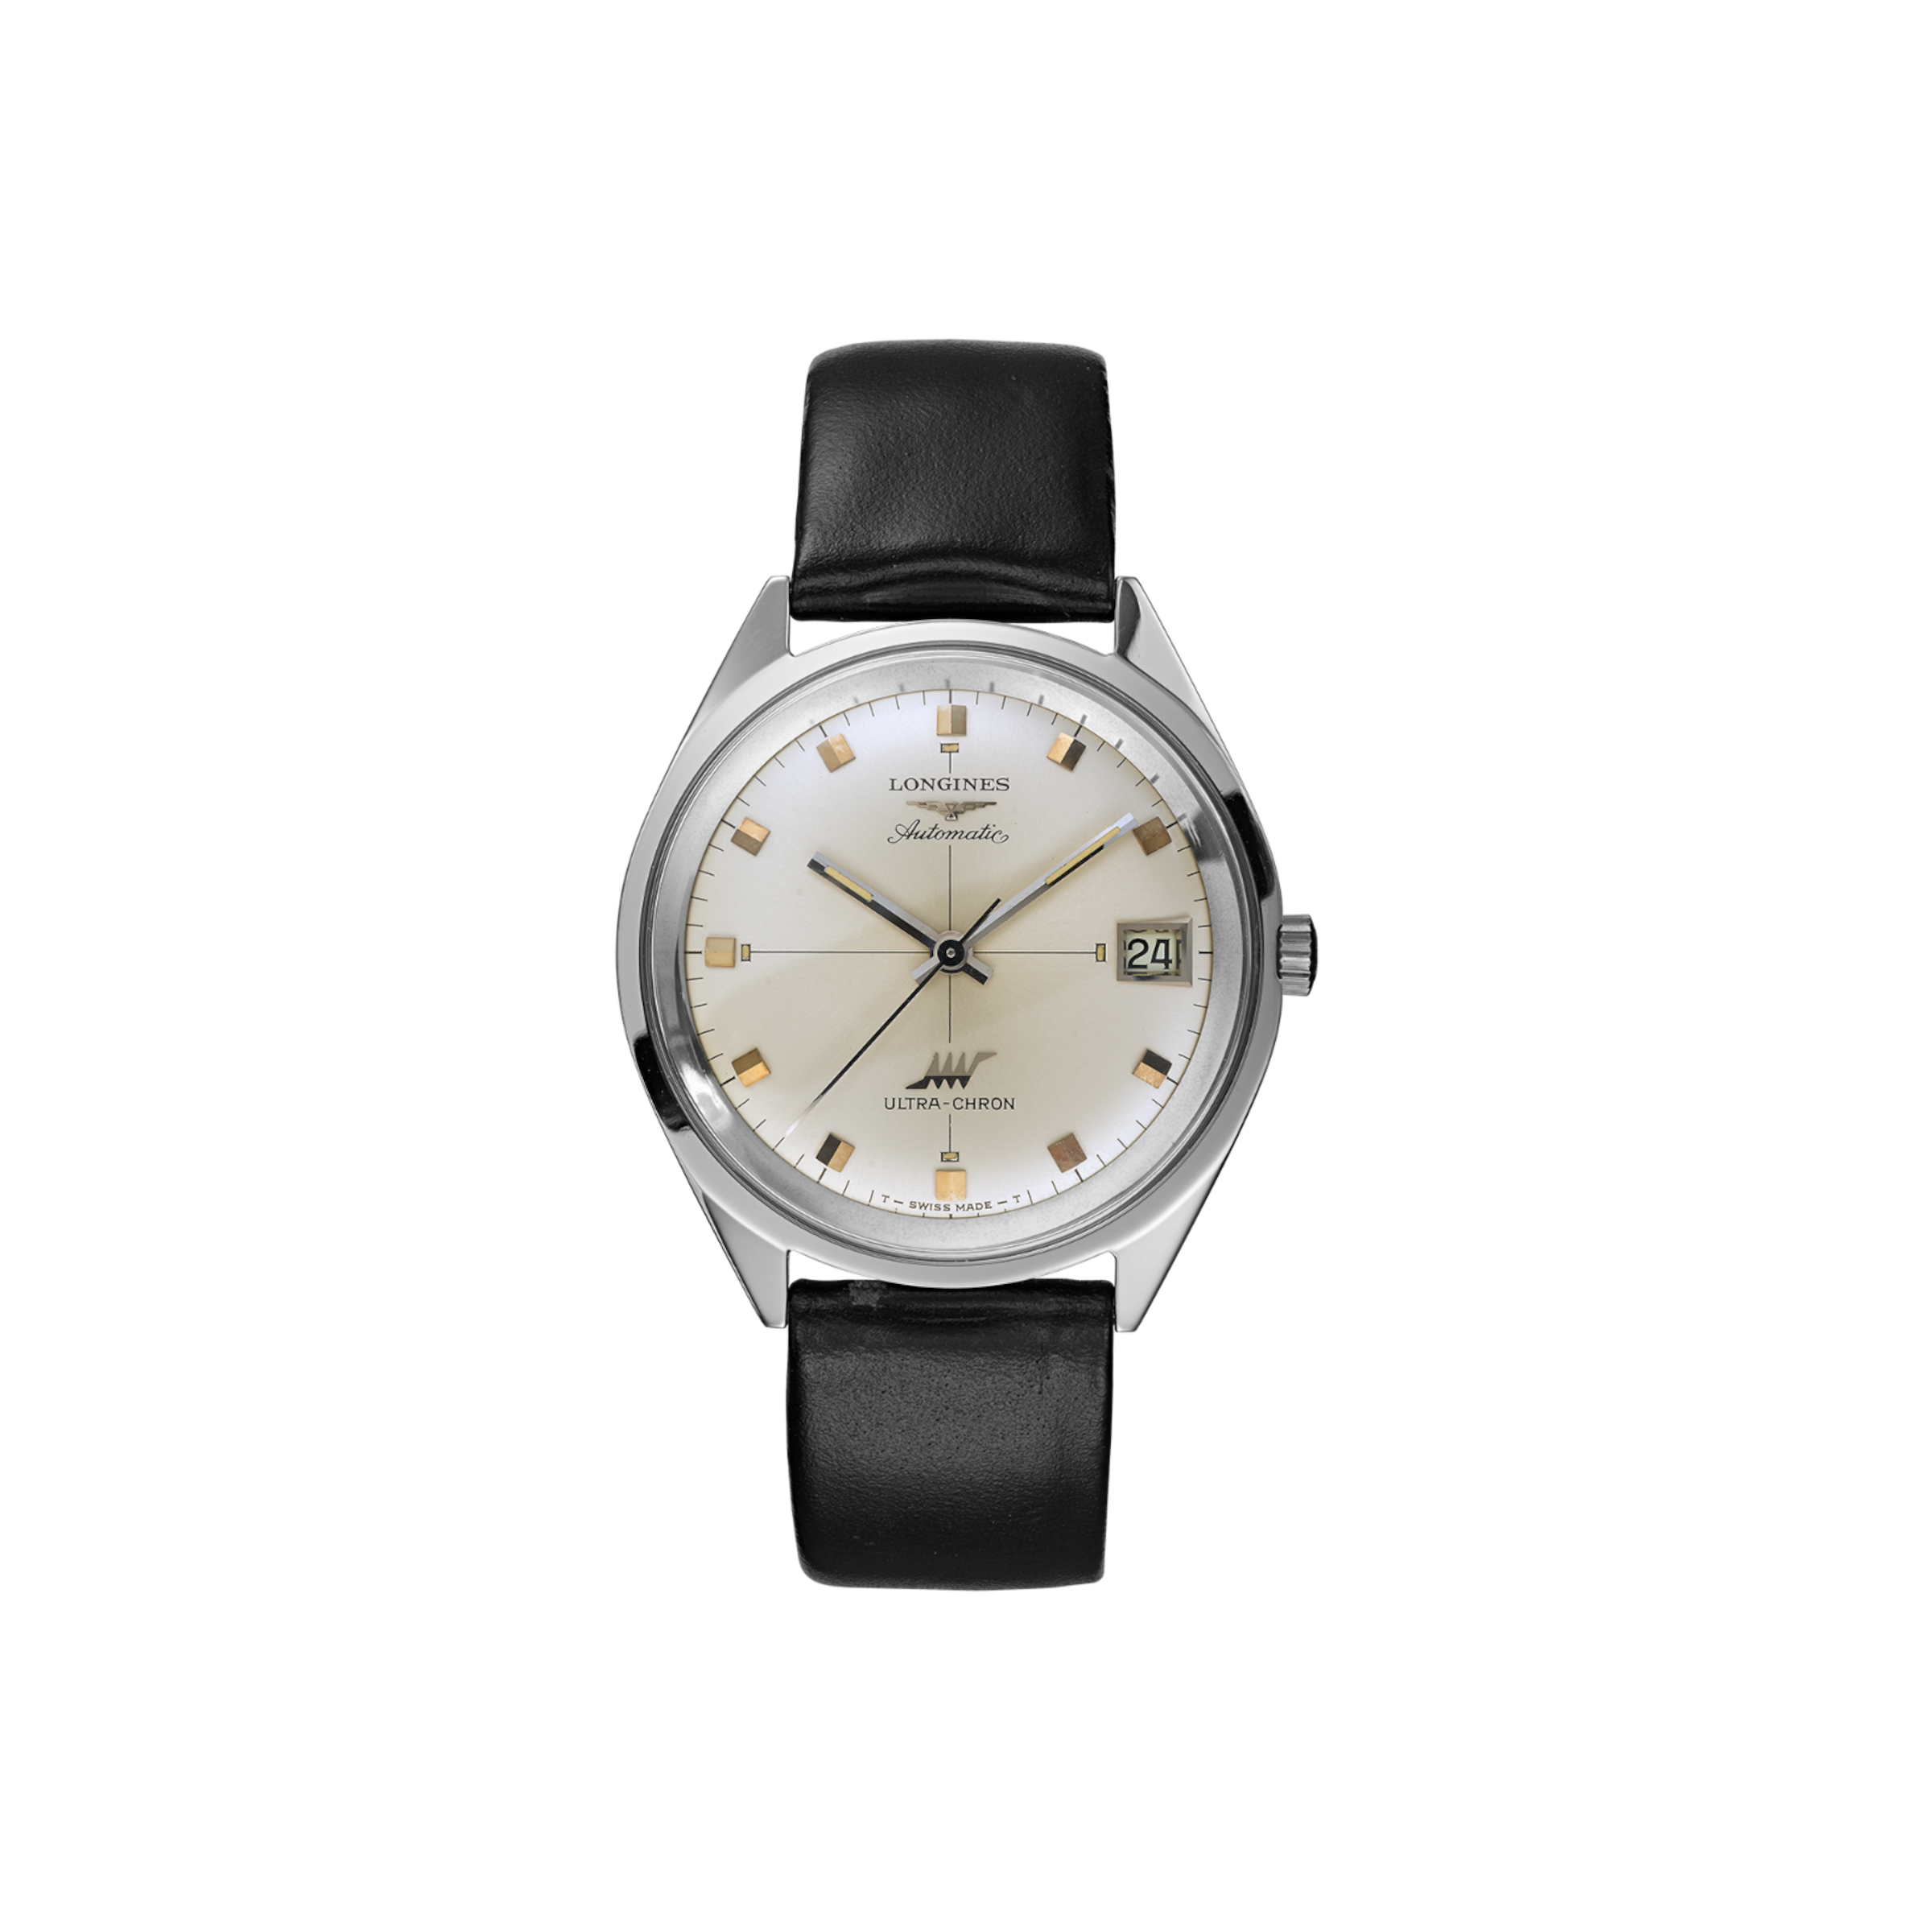 Longines Ultra-Chron with high-frequency movement (1968)